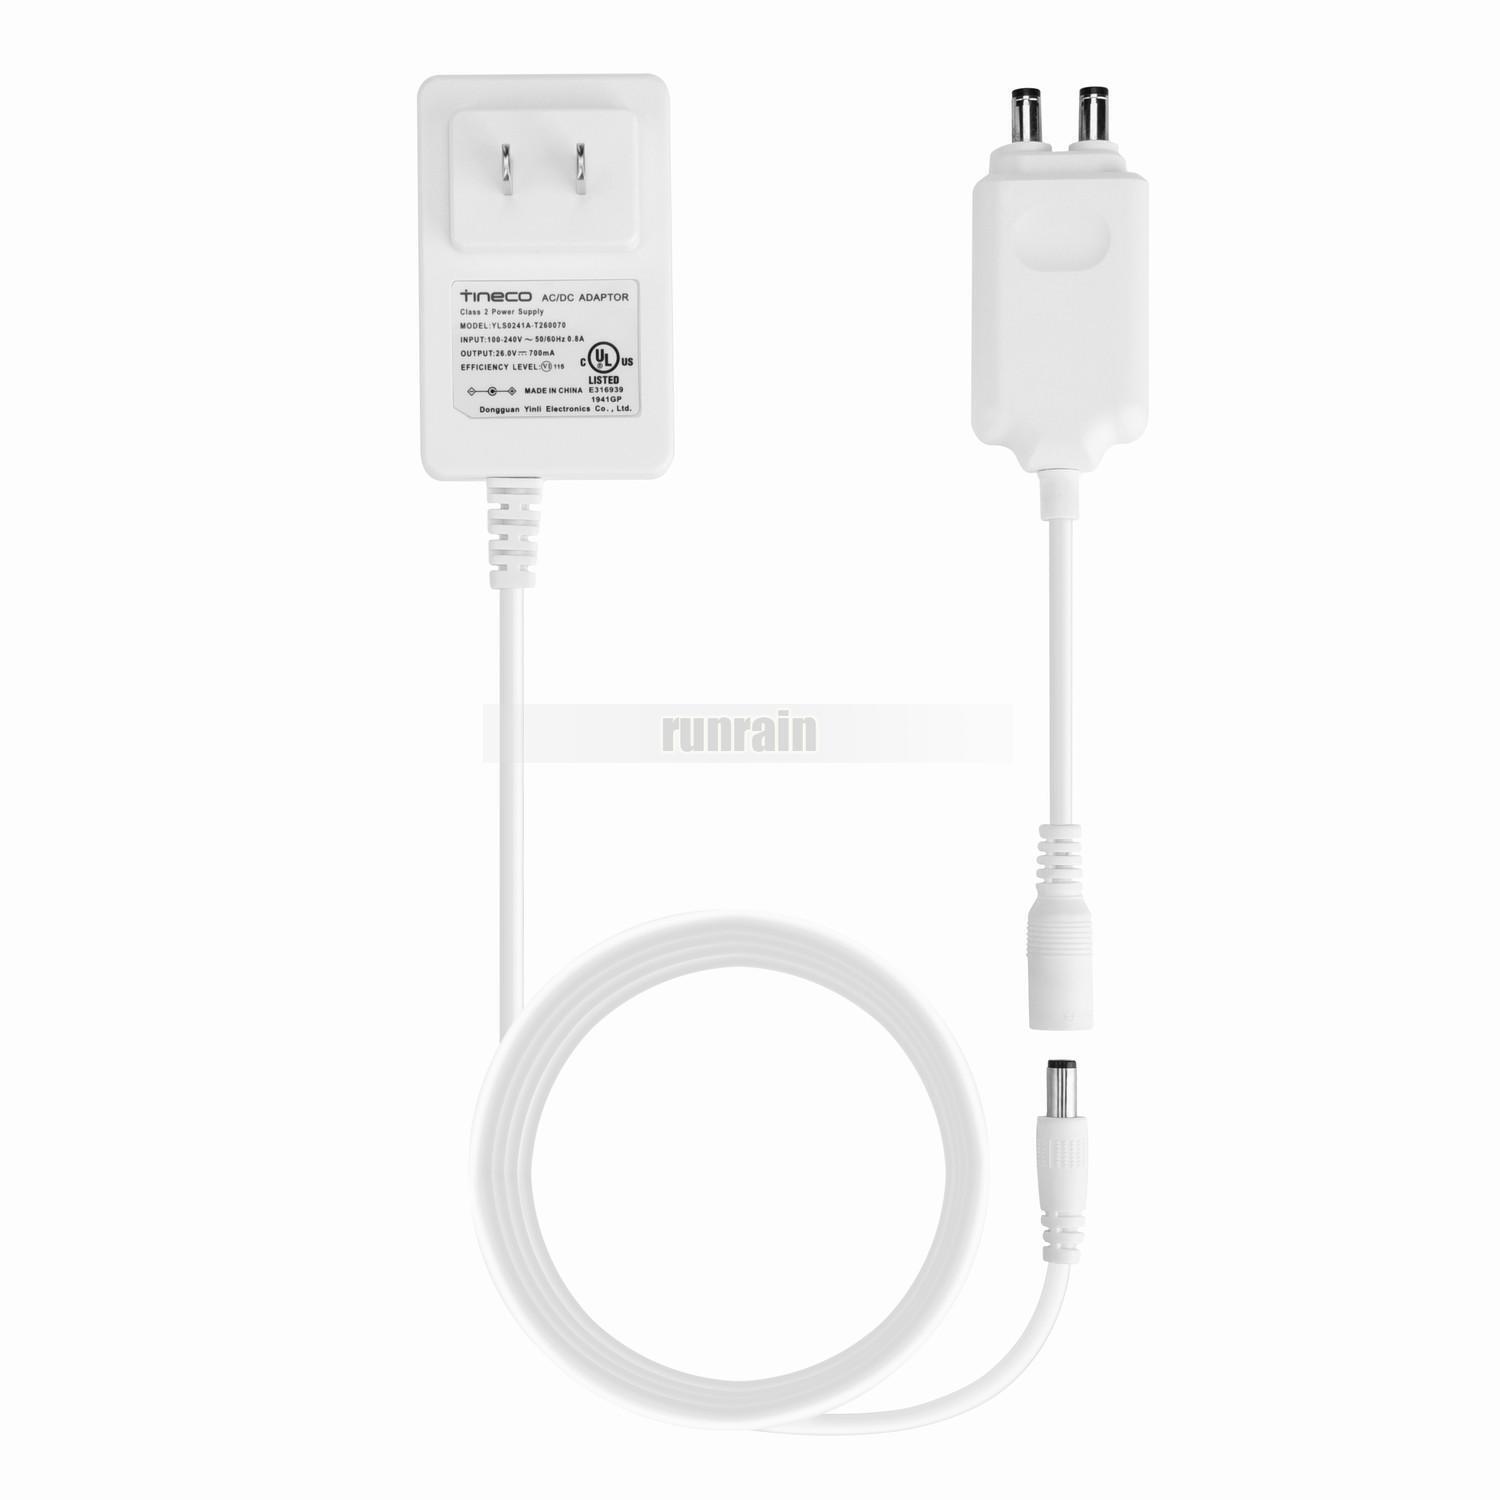 Tineco Pure One S12 S11 A11 Series Dual Charging Adapter 26V 700mA 0.7A Brand: